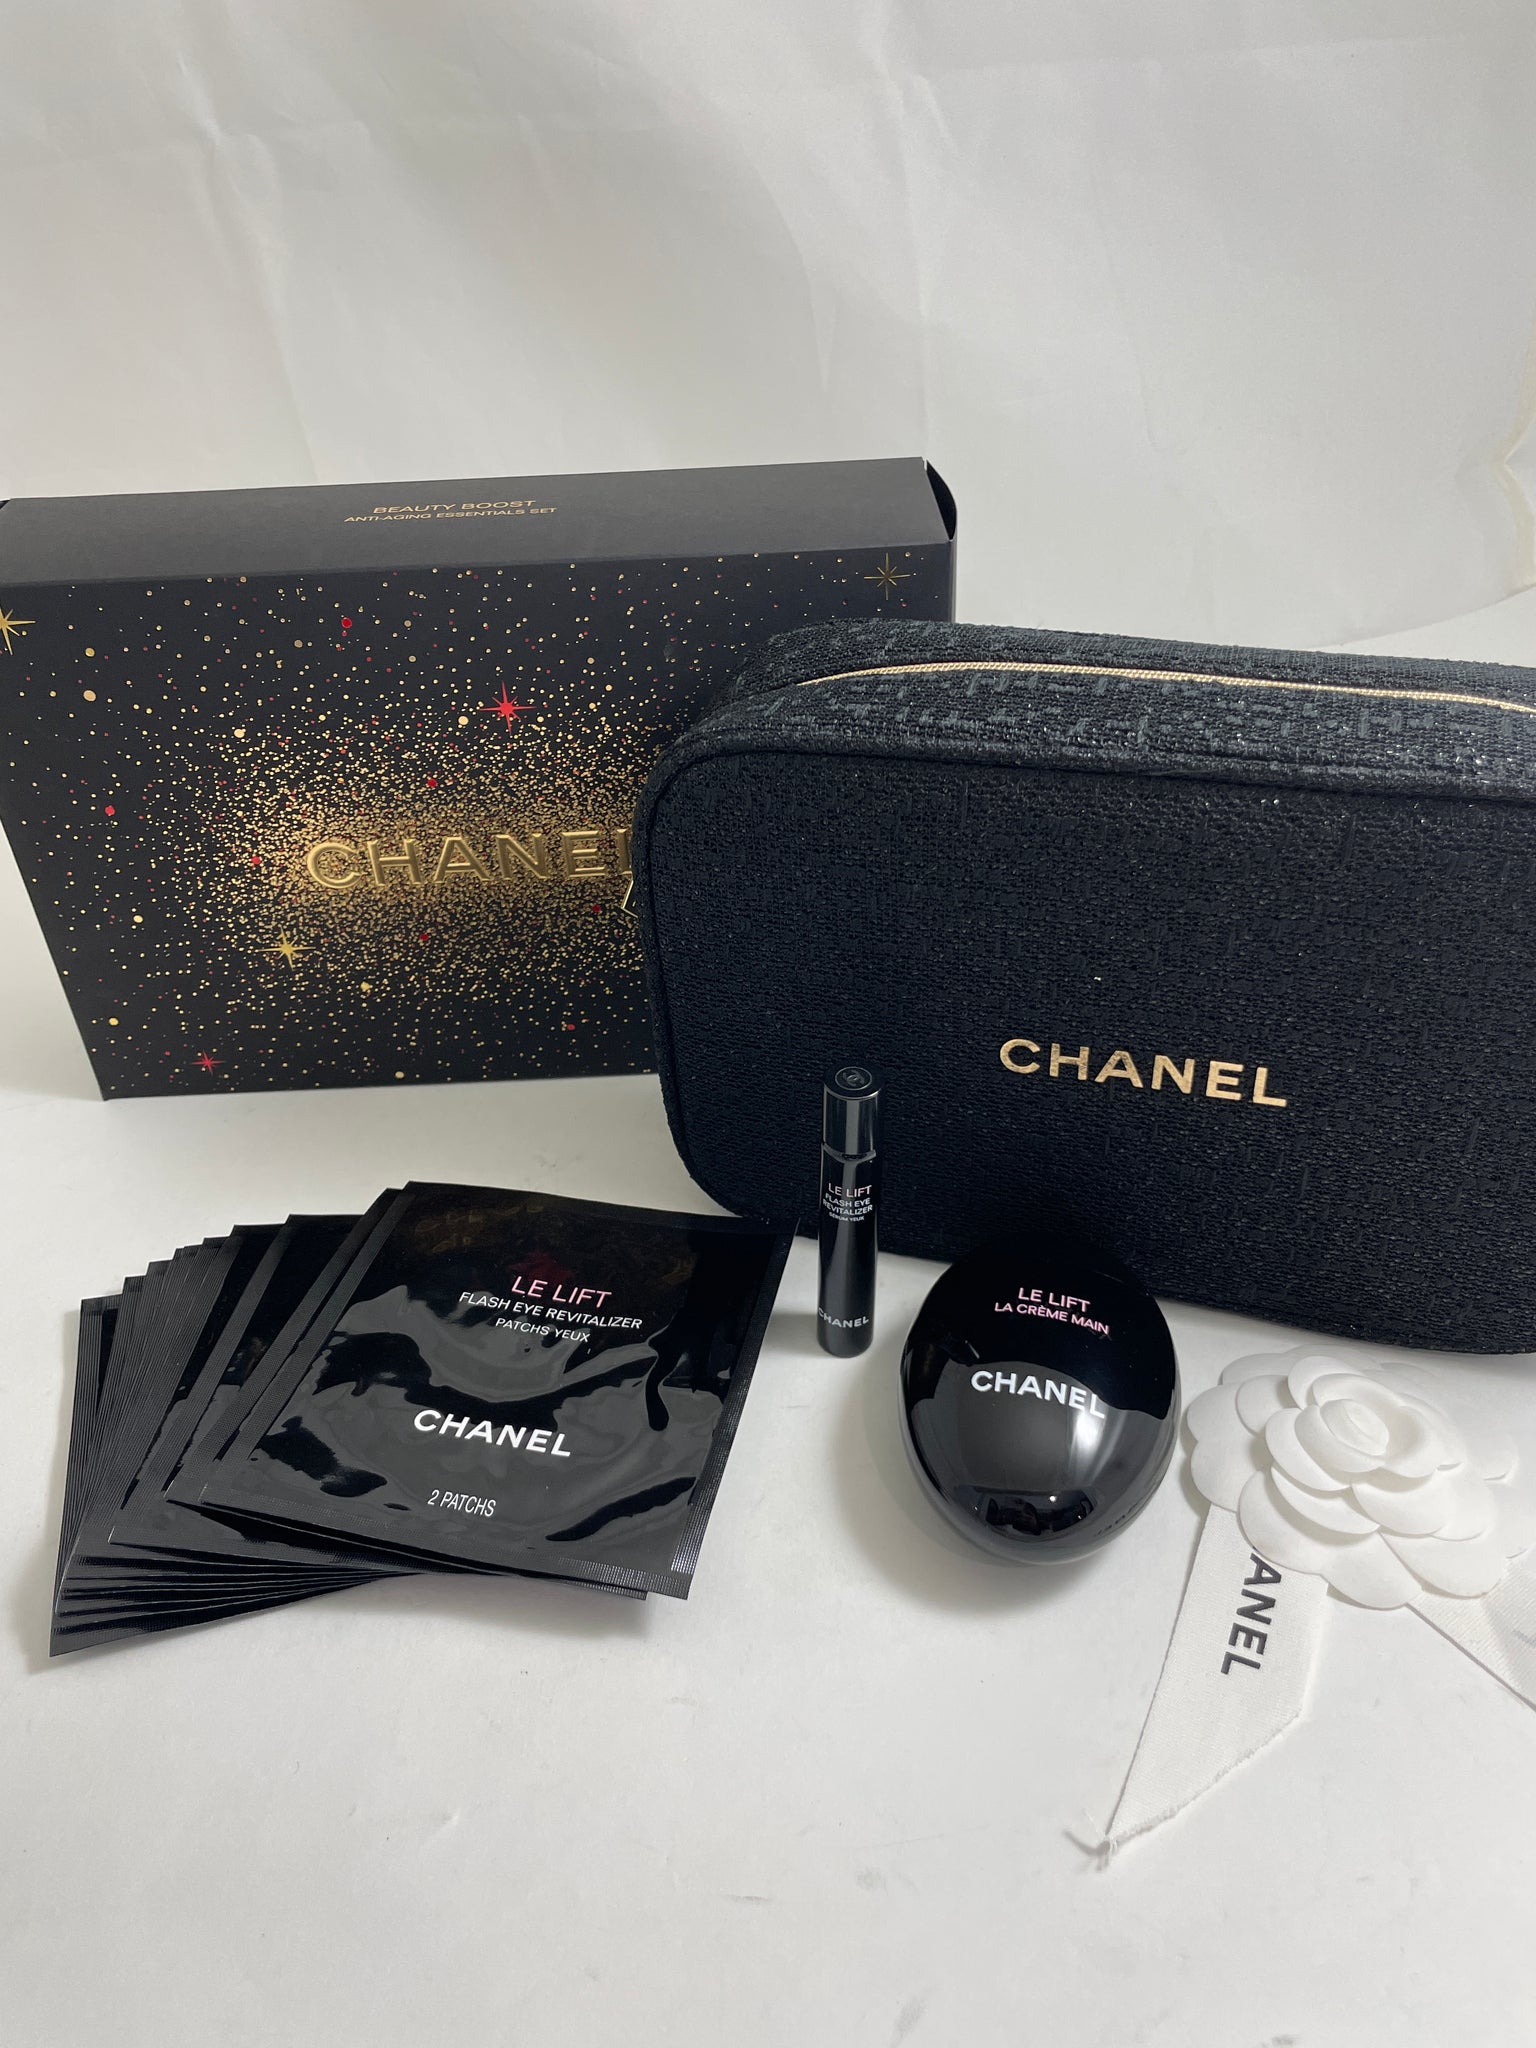 Chanel 2021 Beauty Gift Set Beauty Boost Anti-Aging Essentials Set